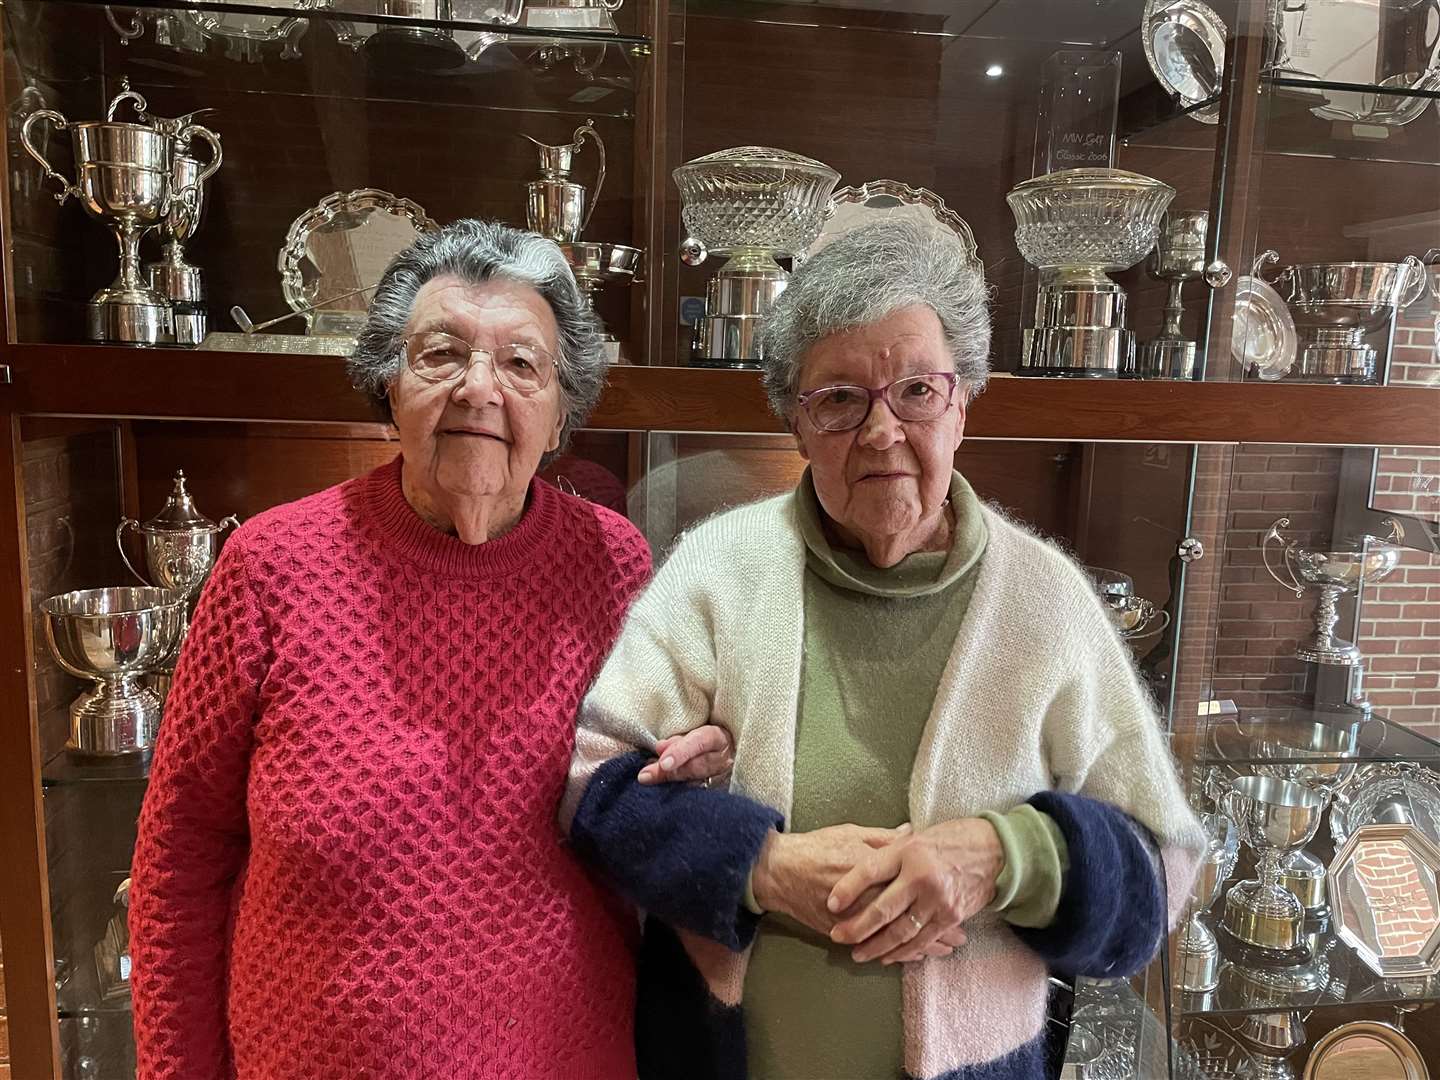 From left: Longtime Gills fans Edna Haas and Iris Smith